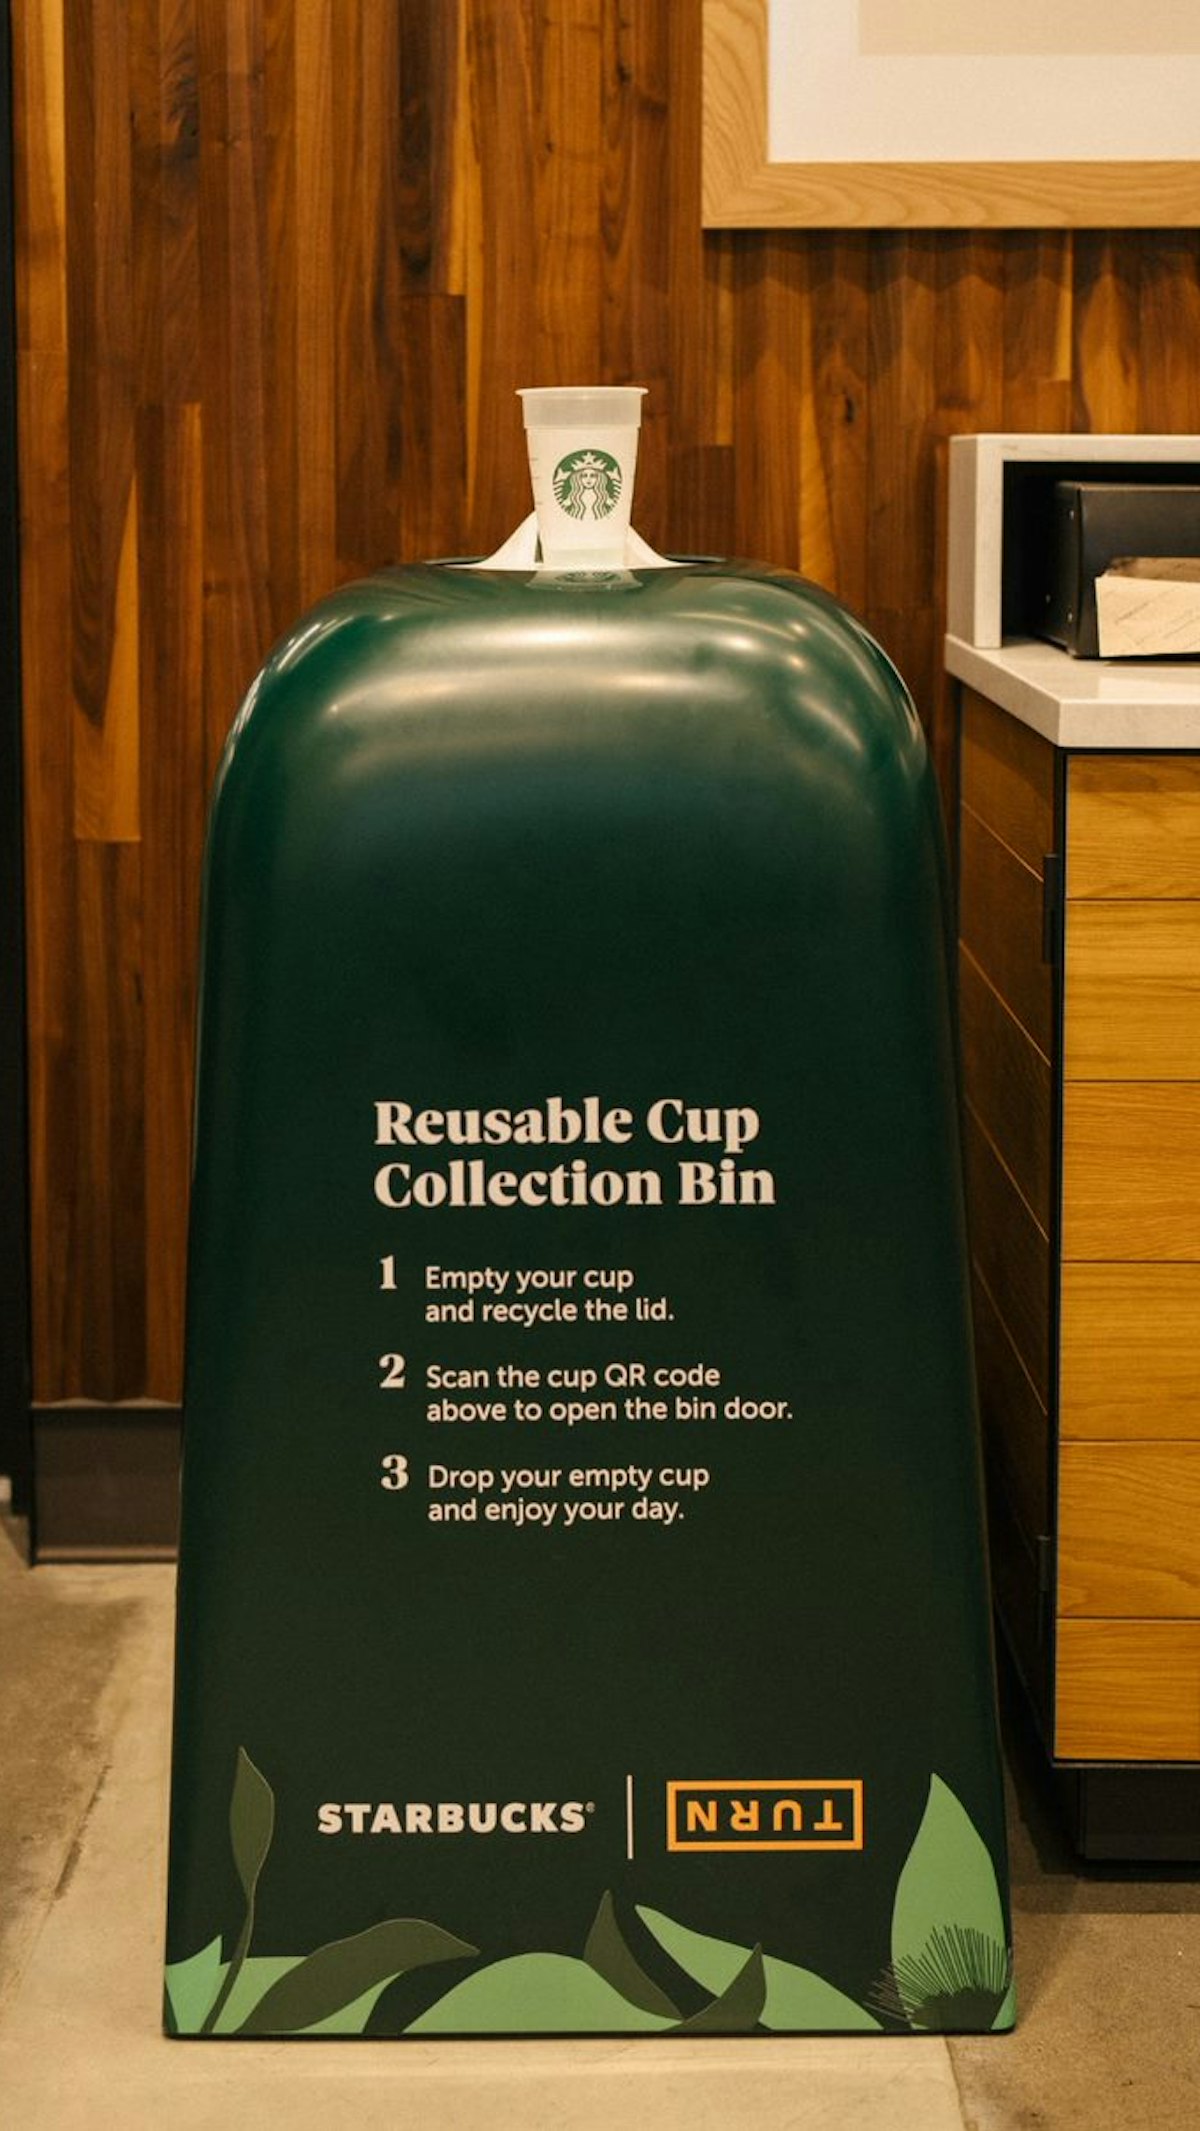 https://img.packworld.com/files/base/pmmi/all/image/2023/08/TURN_Reusable_Cup_Collection_Bin_1.64dbfb0be93fc.png?auto=format%2Ccompress&fit=max&q=70&rect=62%2C0%2C682%2C1211&w=1200